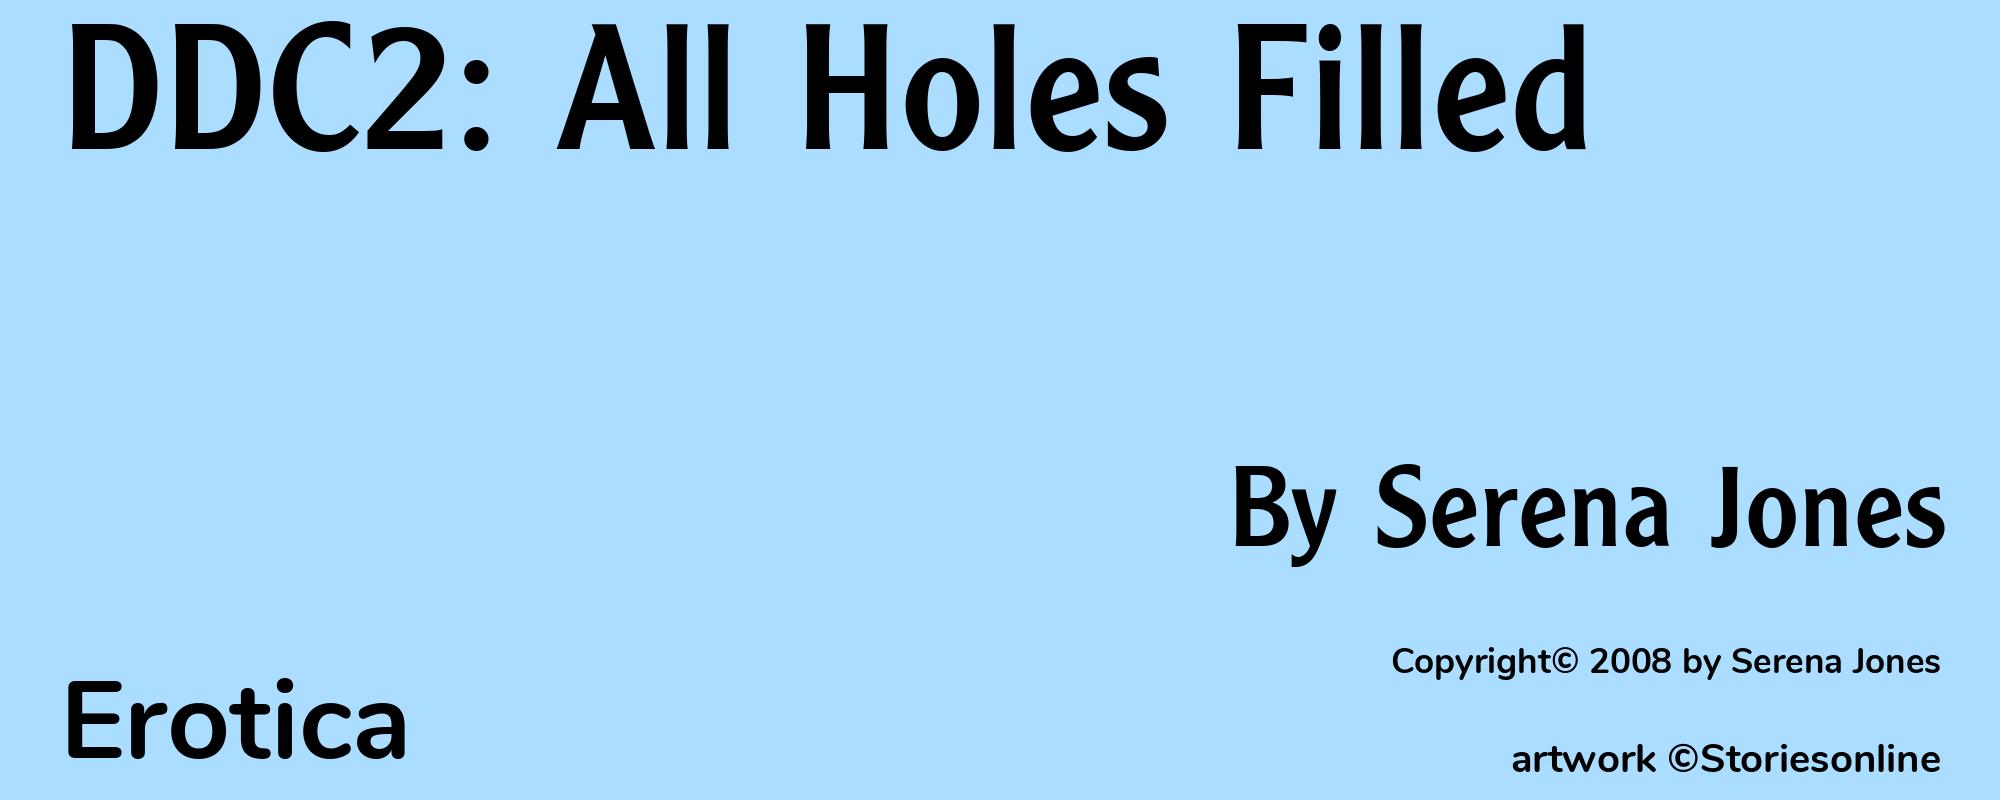 DDC2: All Holes Filled - Cover